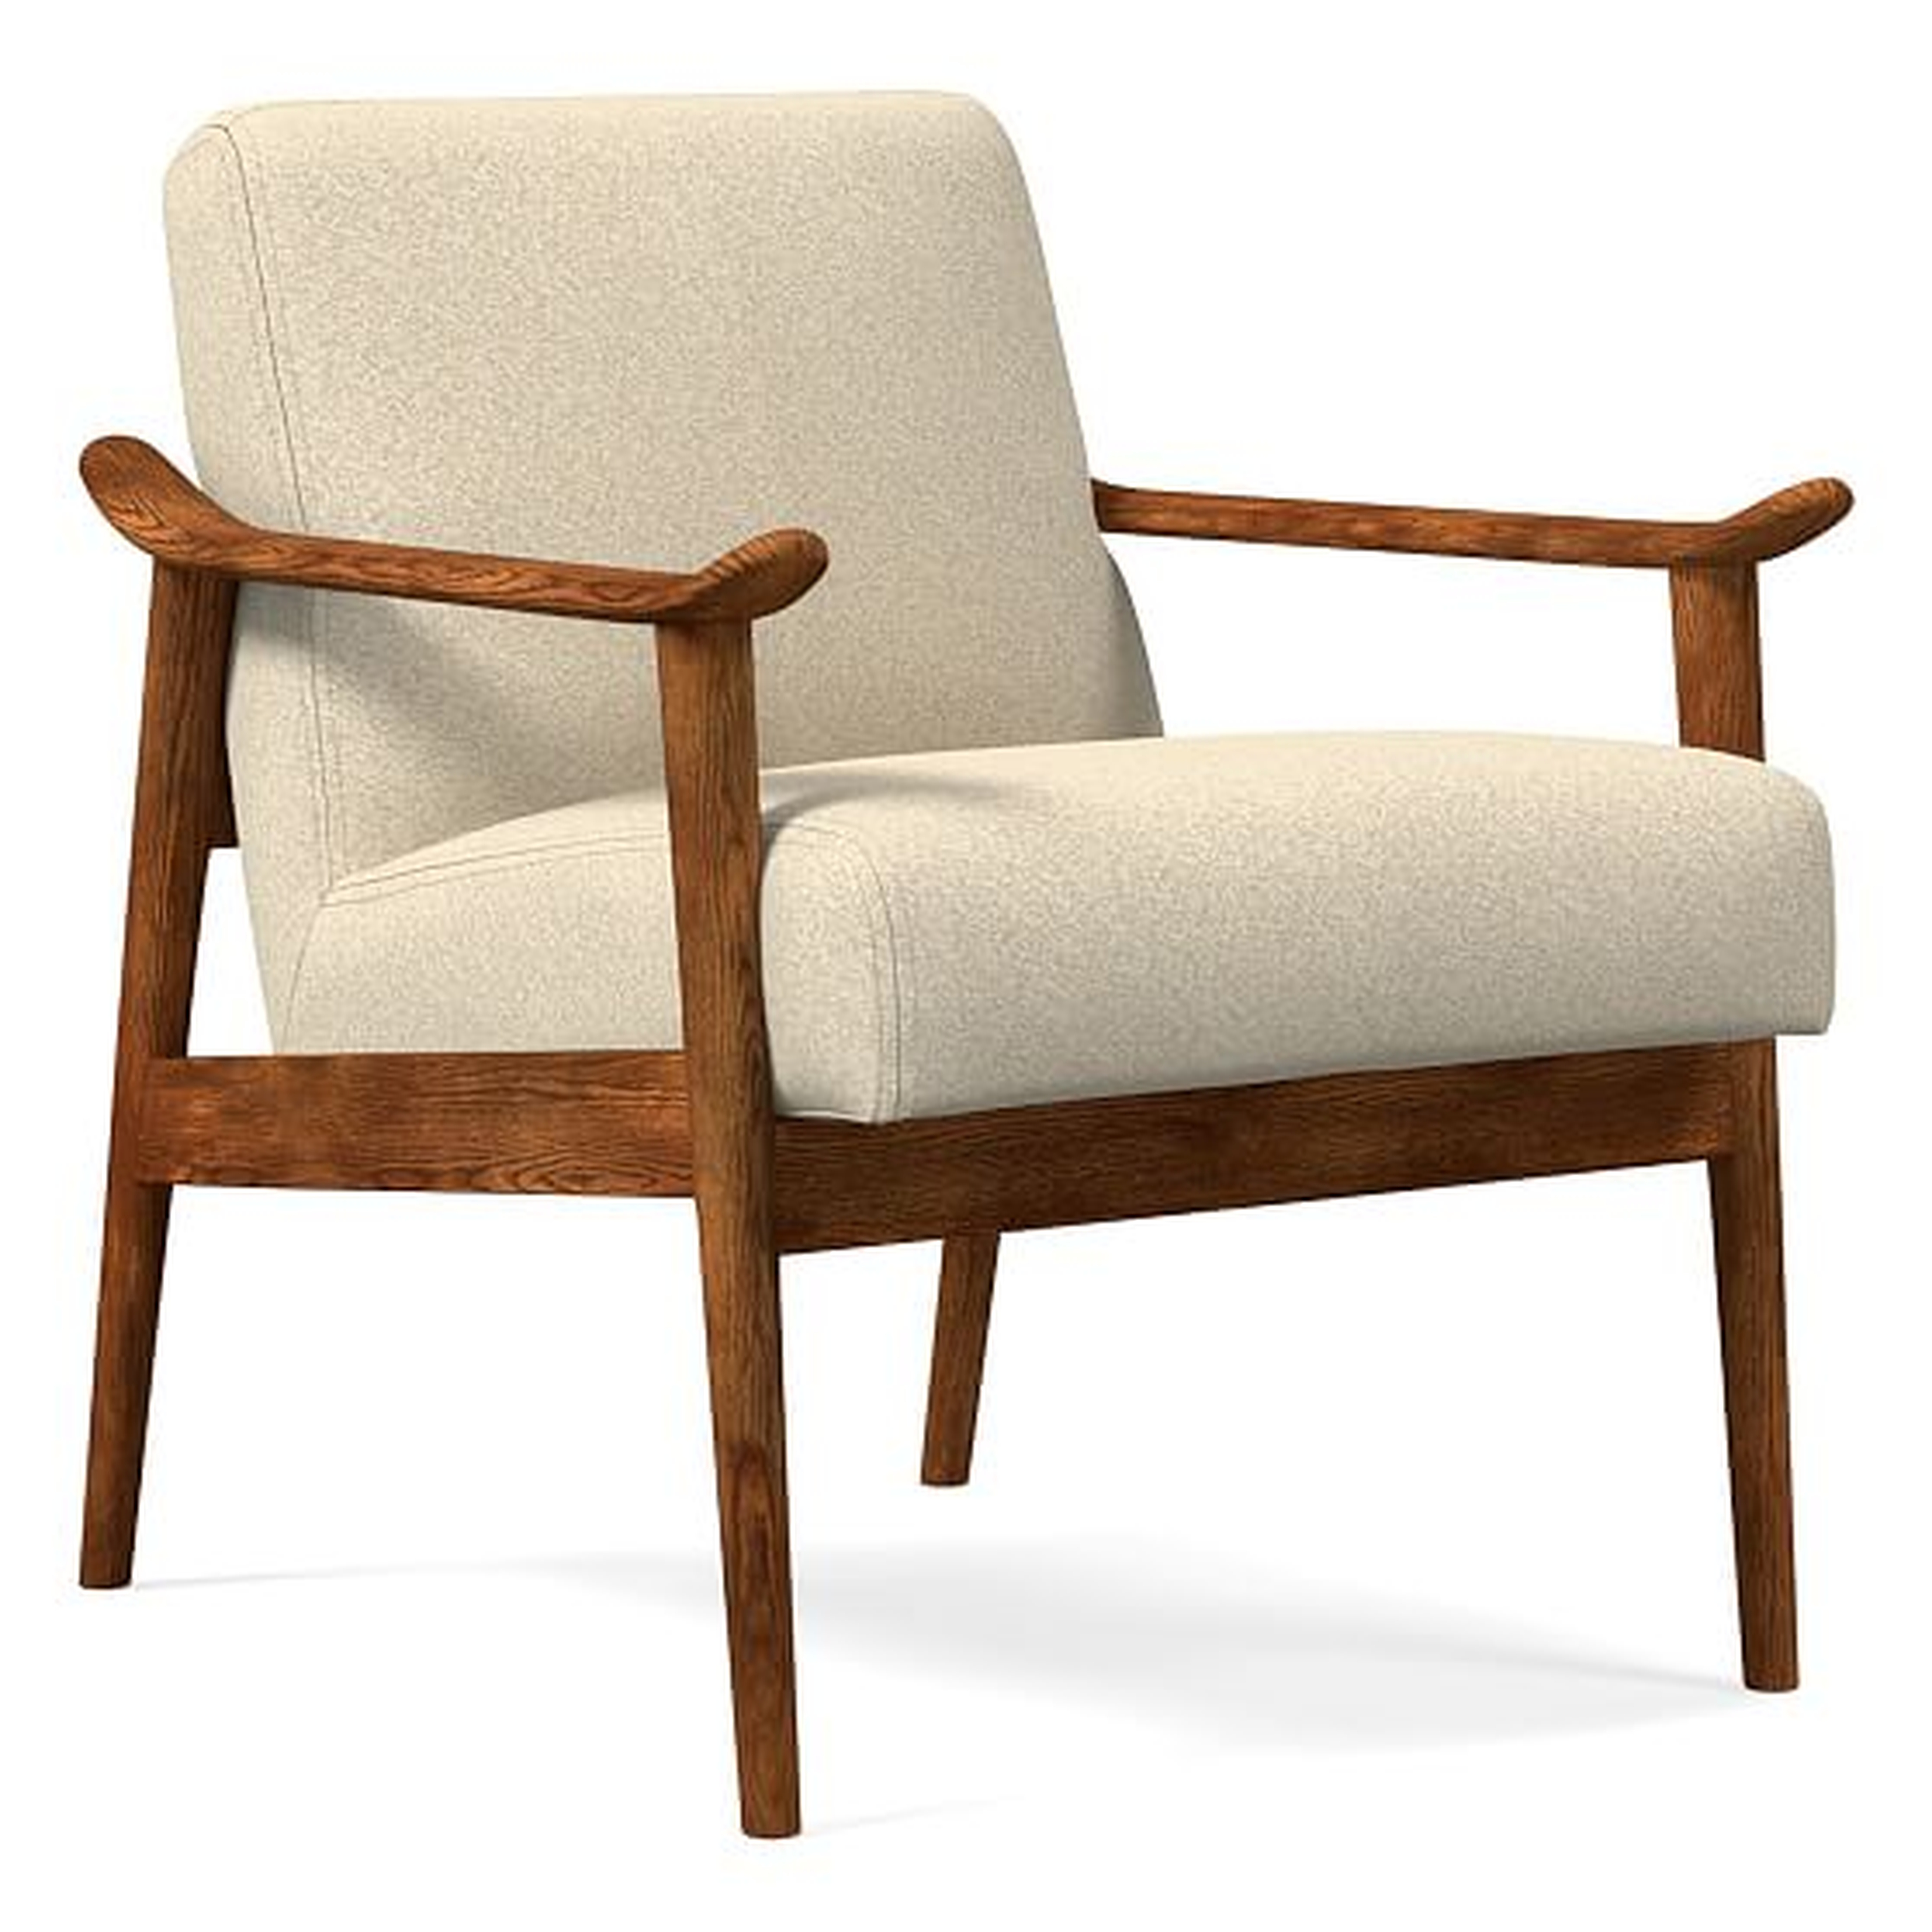 Midcentury Show Wood Chair, Poly, Luxe Boucle, Angora Beige, Pecan - West Elm